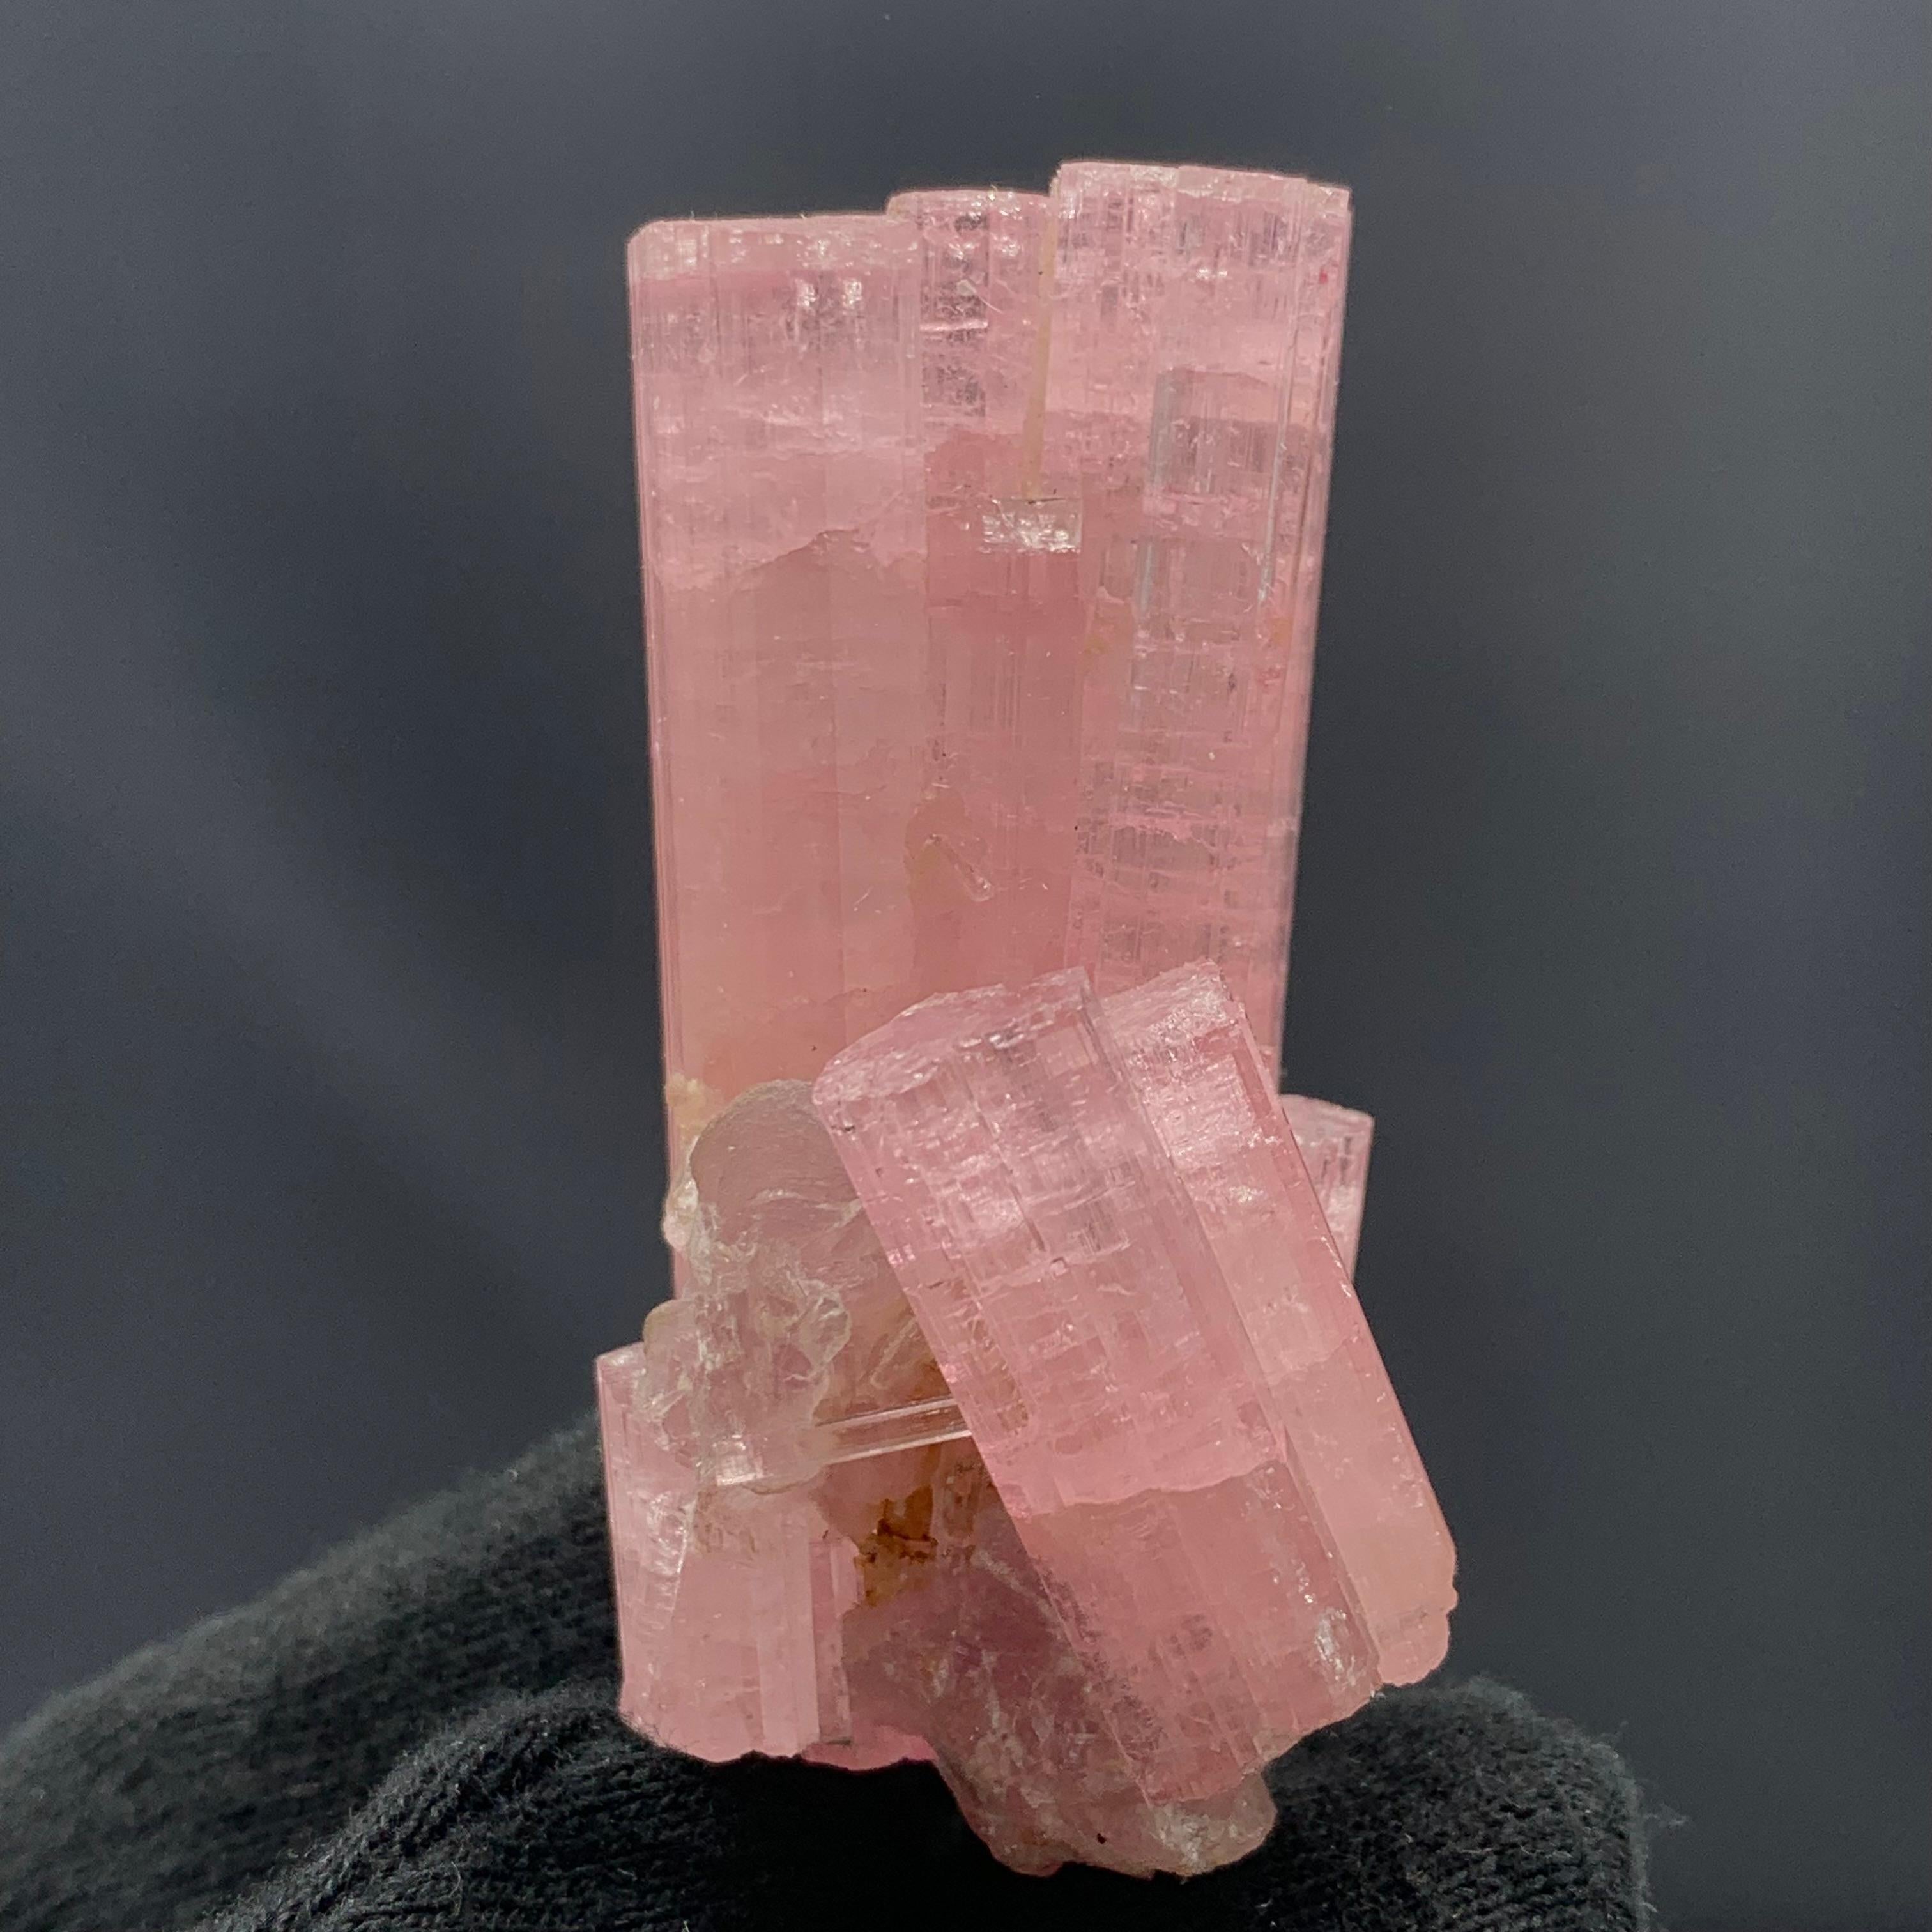 63.27 Gram Pretty Pink Tourmaline Crystal Bunch From Paprook Mine, Afghanistan 

Weight: 63.27 Gram 
Dimension : 5.9 x 3.1 x 2.5 Cm
Origin: Paprook Mine, Afghanistan 

Tourmaline is a crystalline silicate mineral group in which boron is compounded